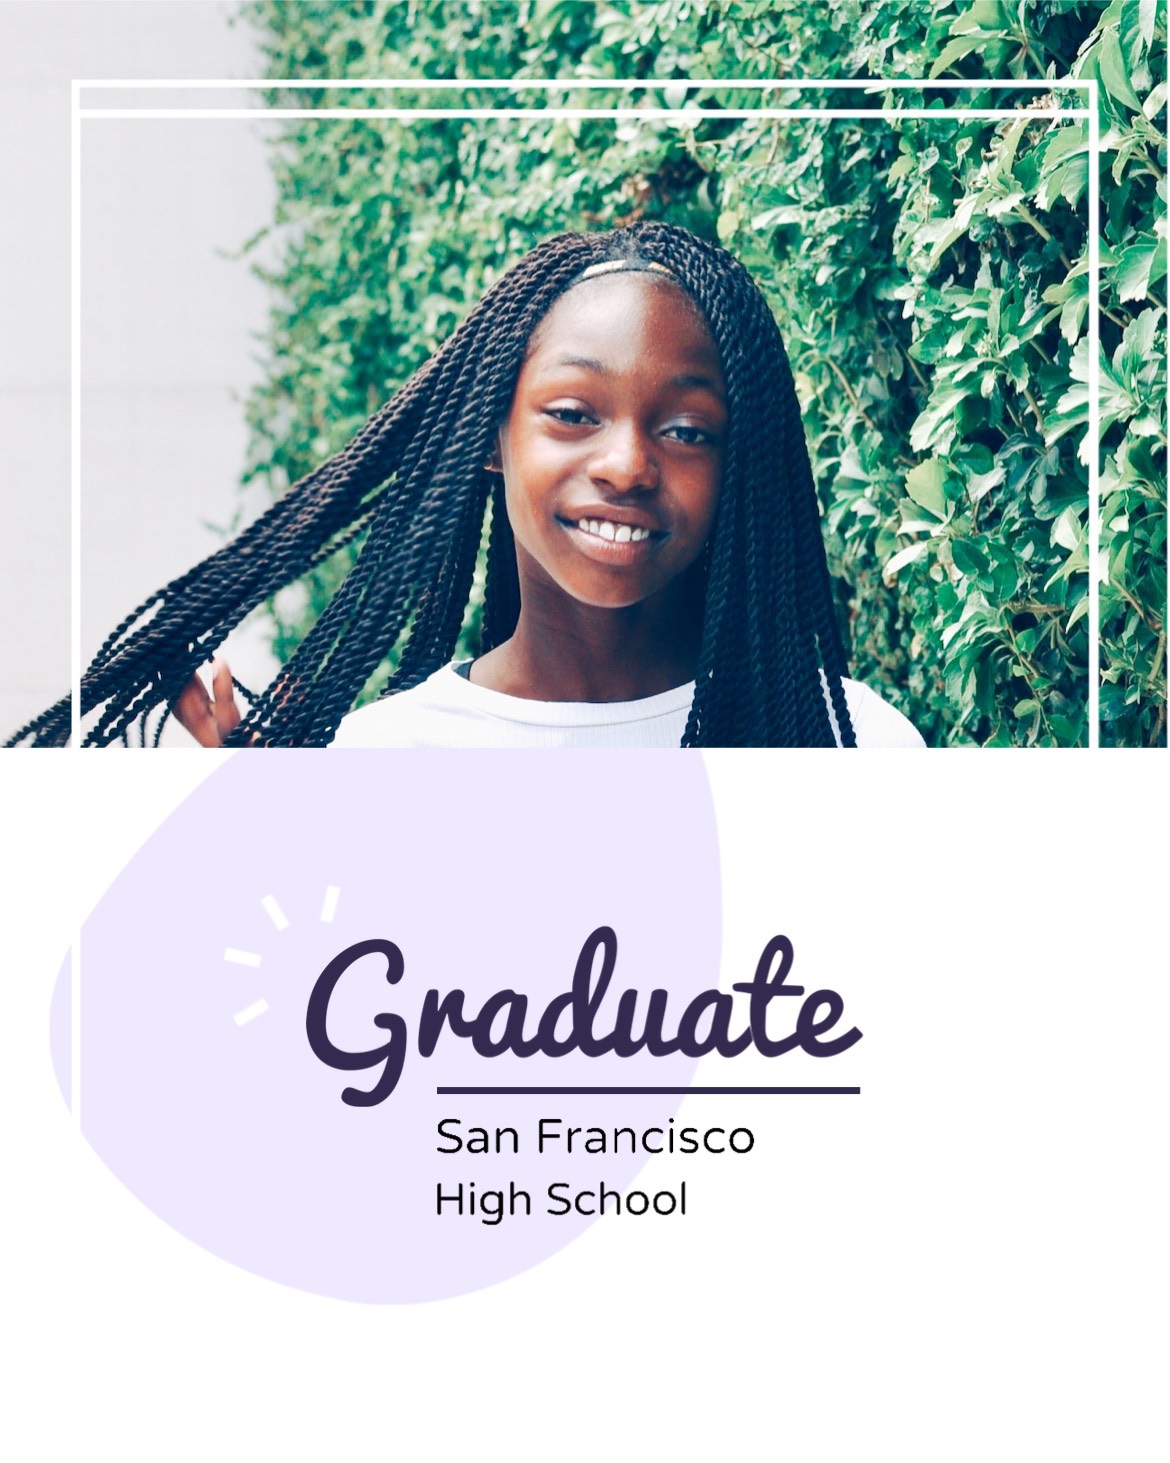 A Girl With Long Braids Smiling In Front Of A Green Wall Graduation Template